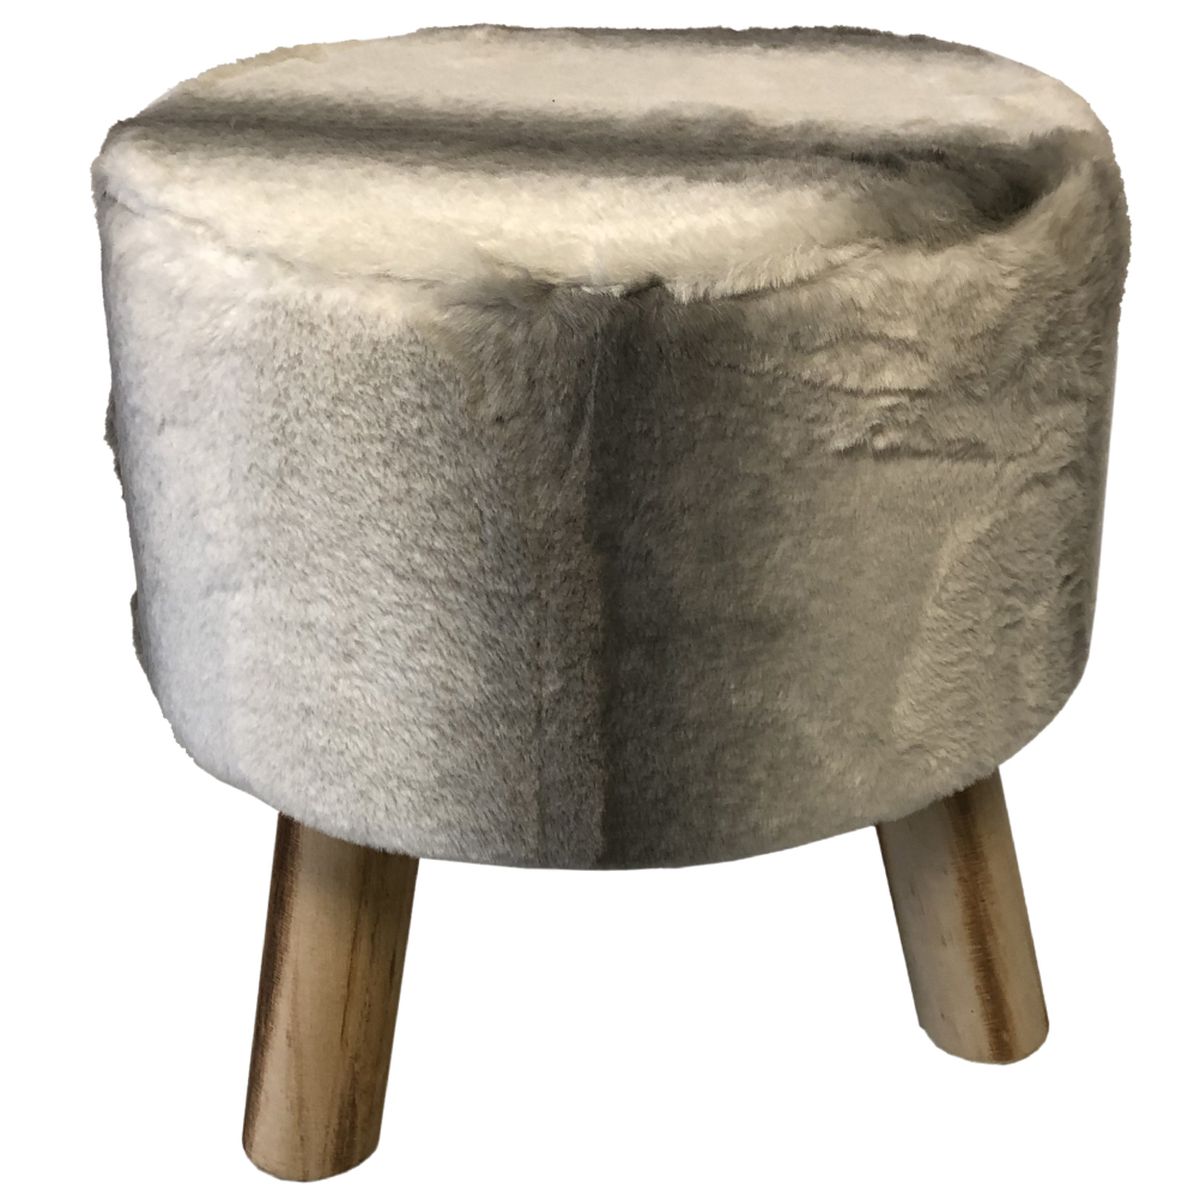 Wood Land and Wolf Stool